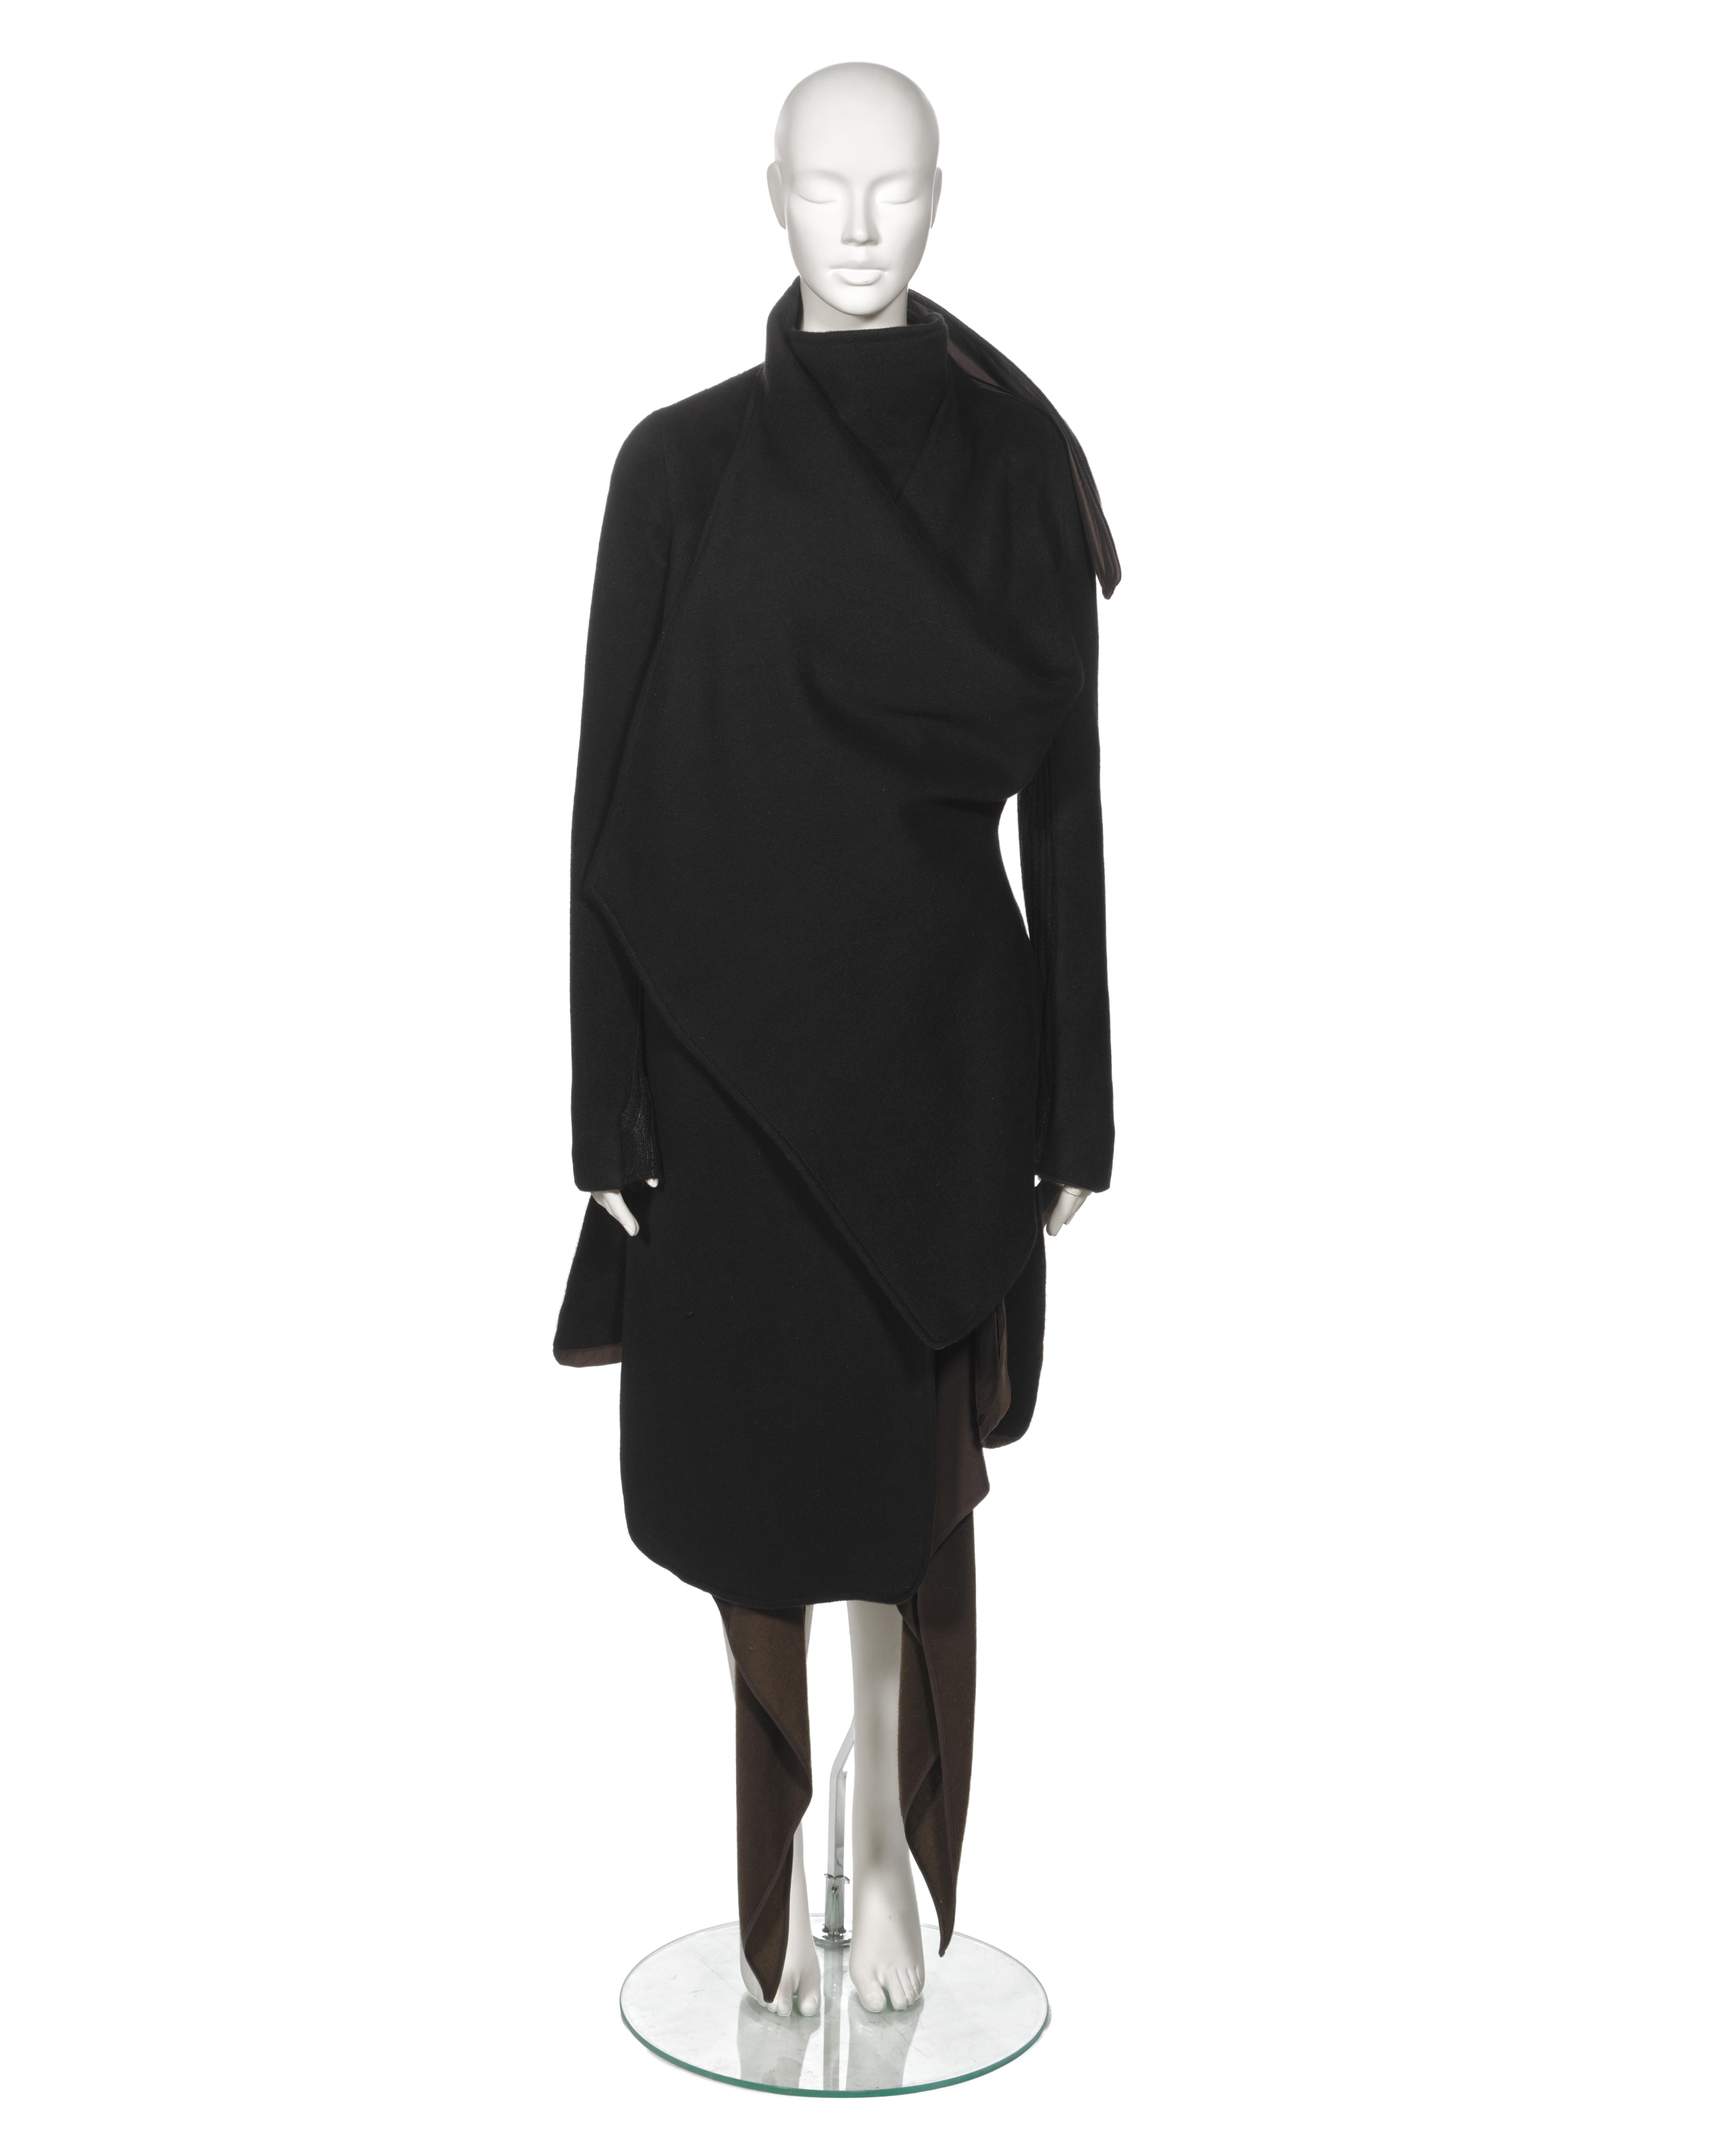 Rick Owens Angora Jacket and Cashmere Skirt 'Queen' Ensemble, fw 2004 For Sale 4